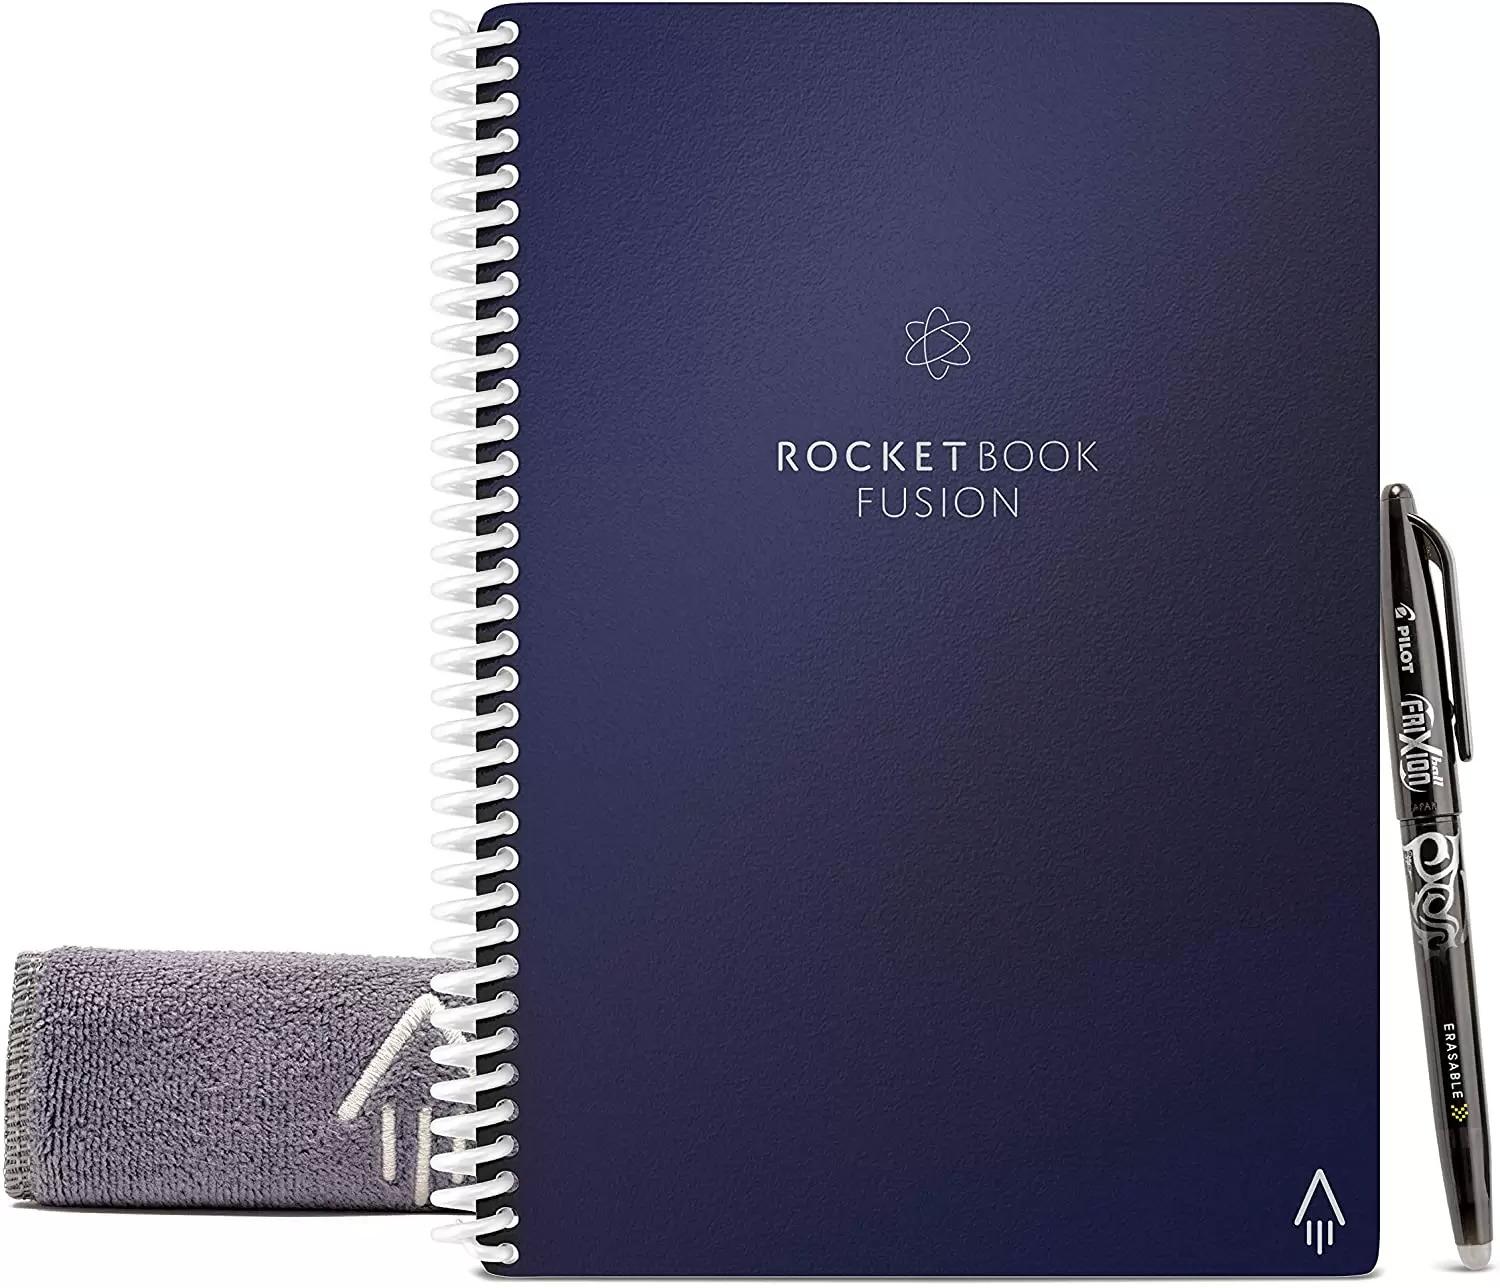 Rocketbook Fusion Smart Reusable Notebook for $24.50